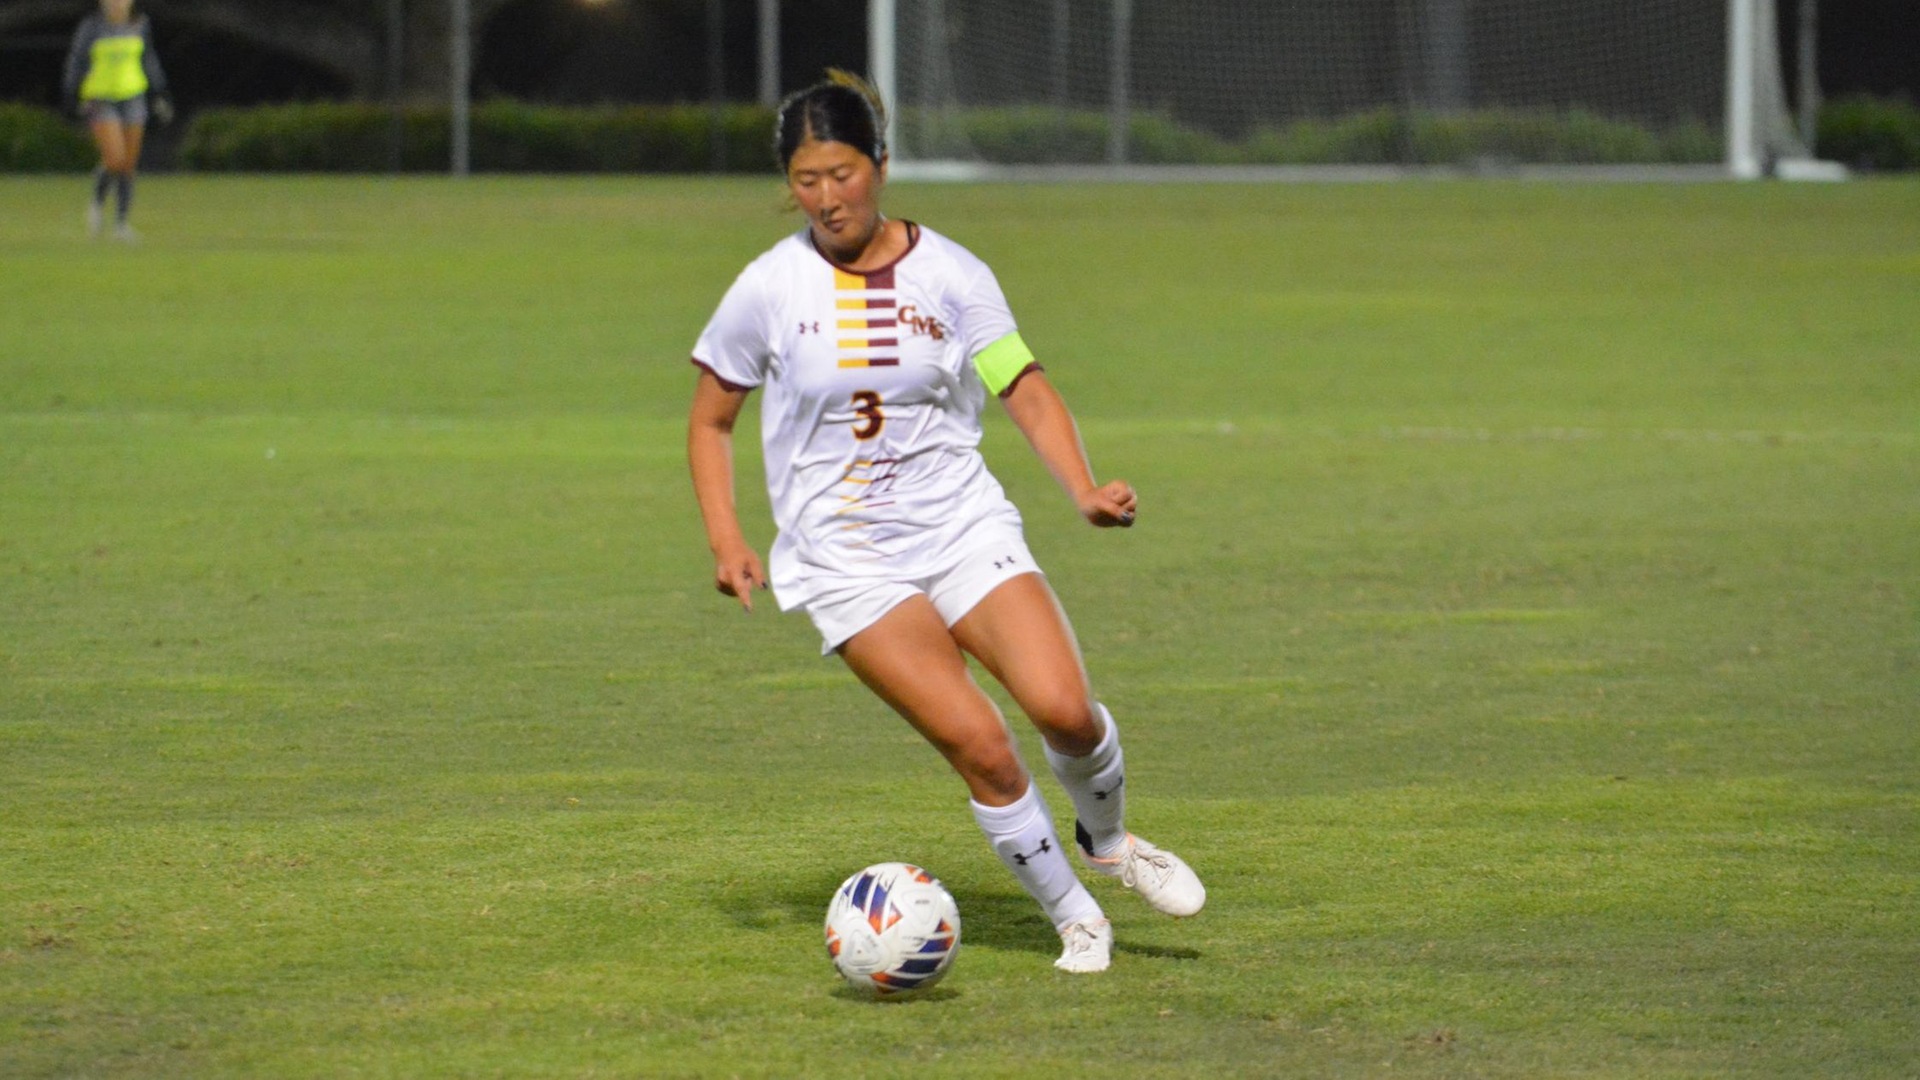 CMS Women's Soccer Dominates Second Half, But Settles for 1-1 Tie with Occidental